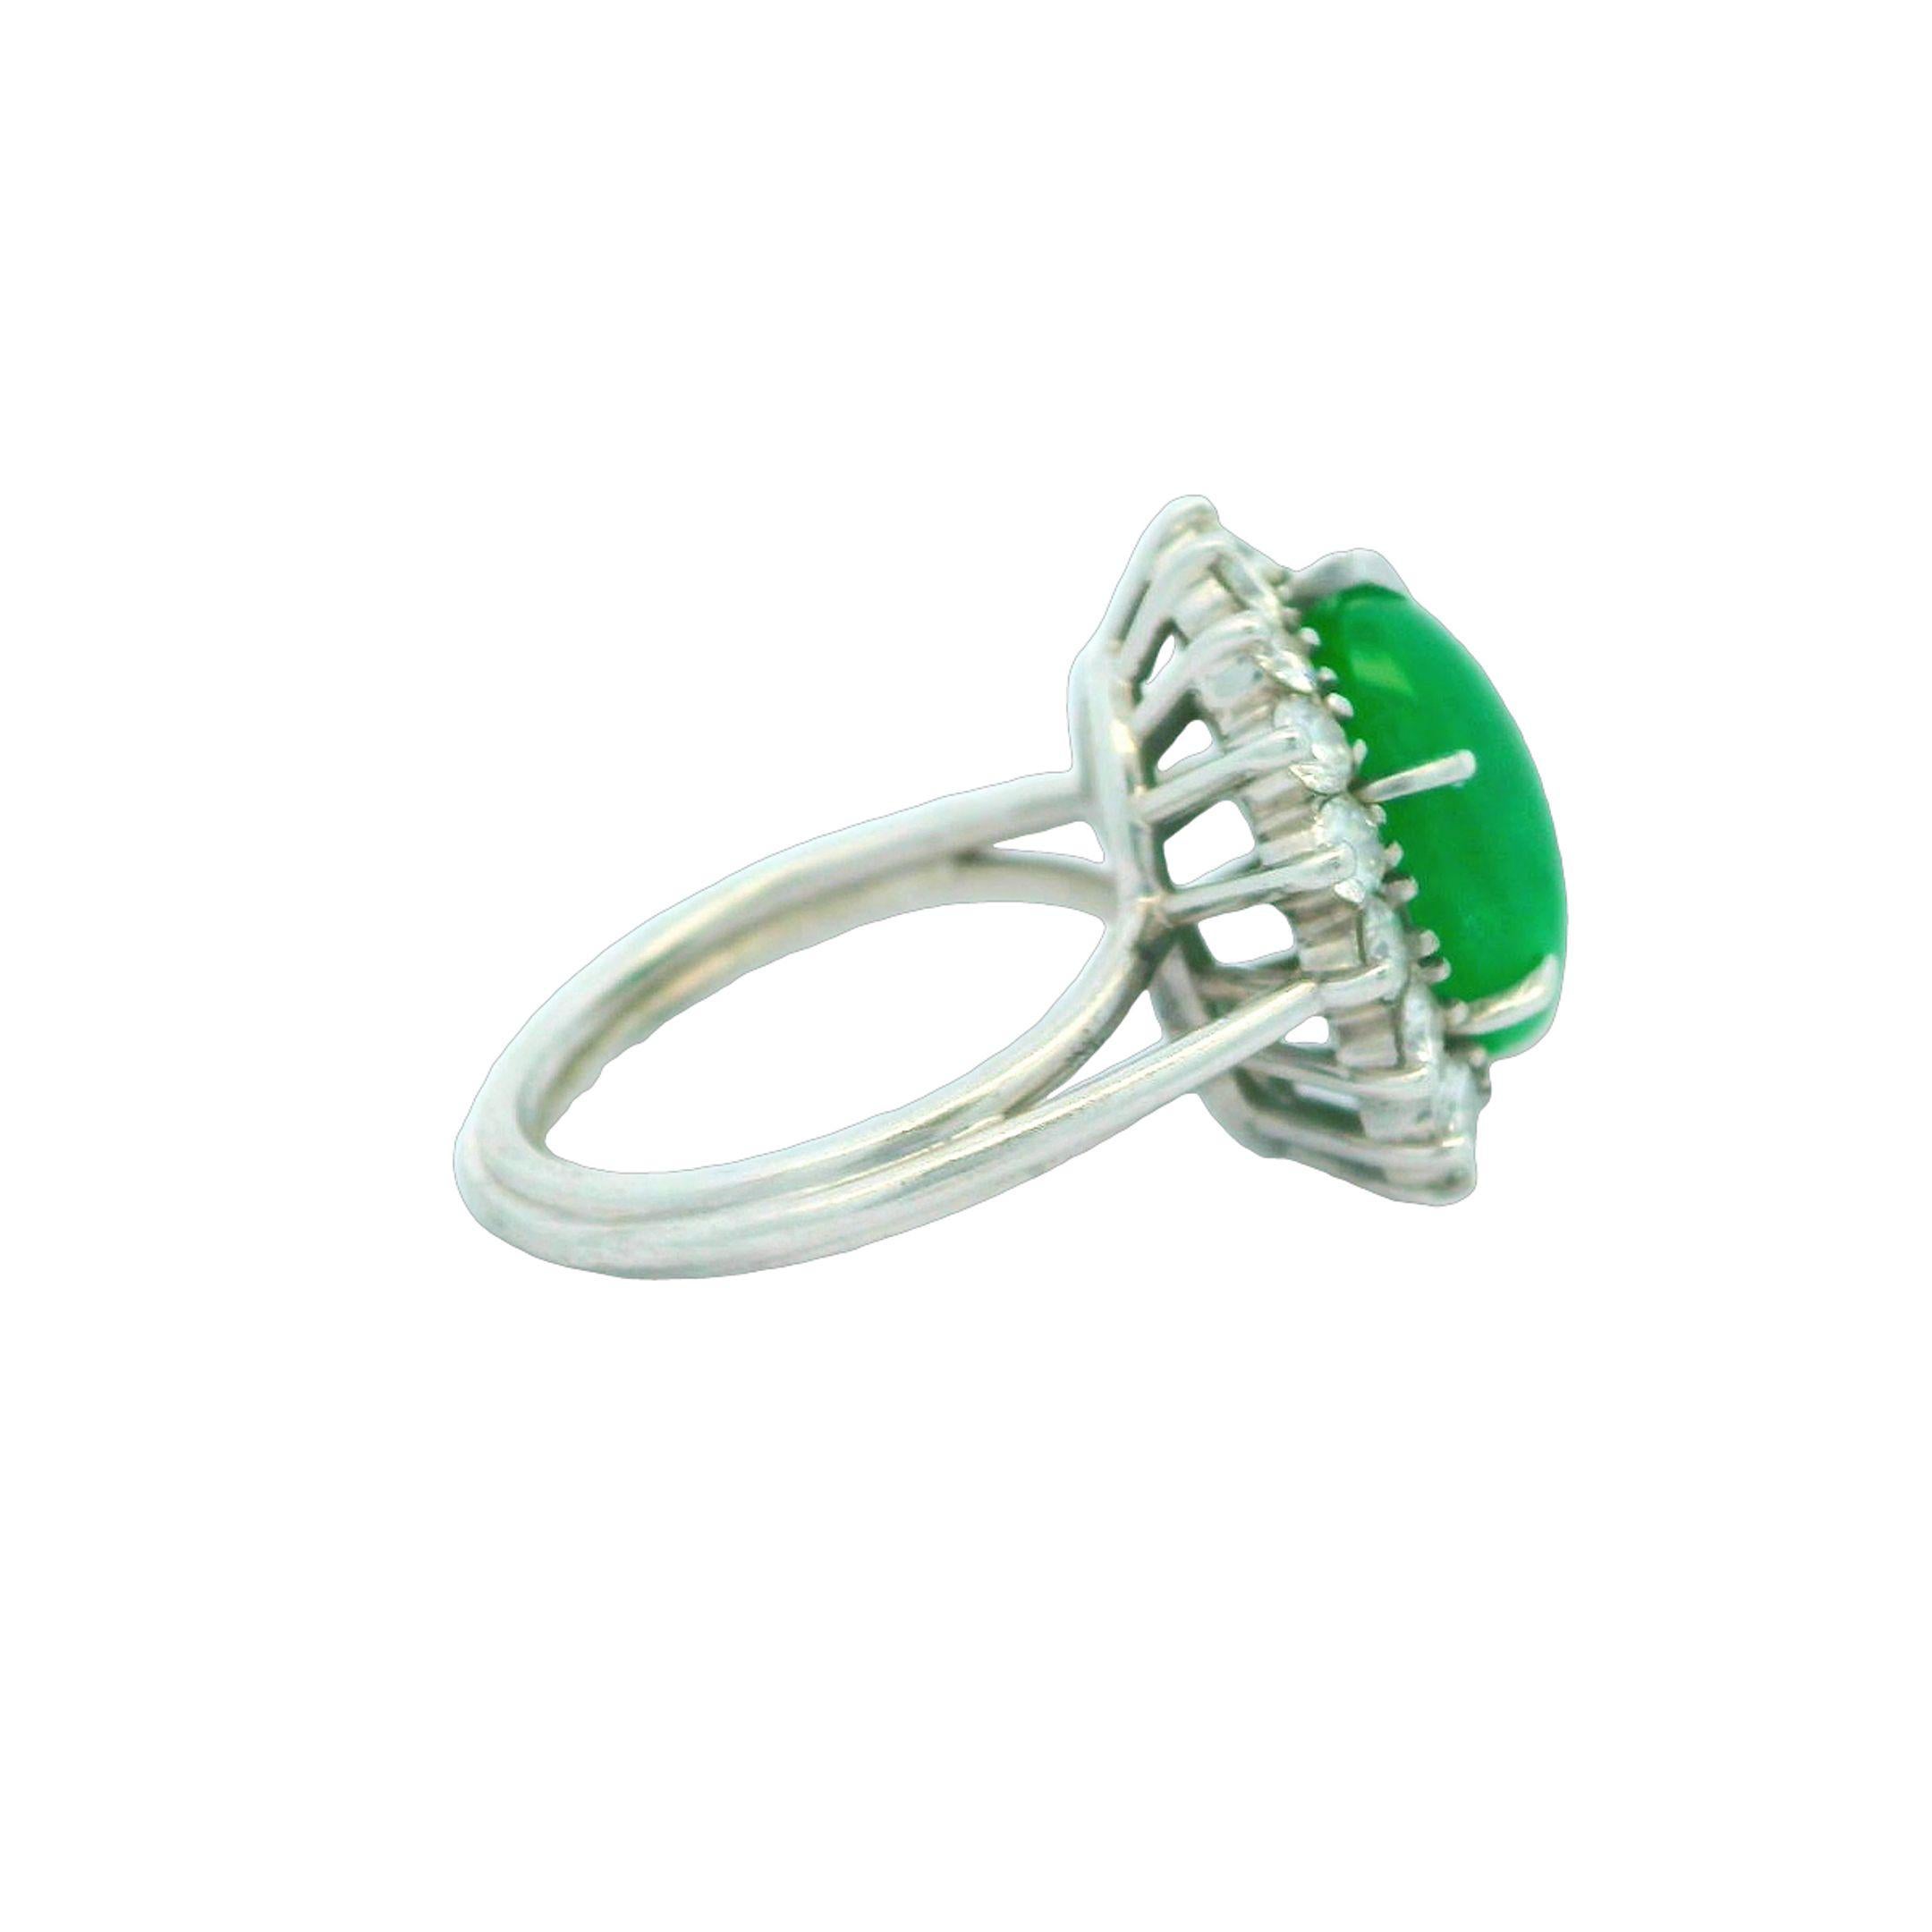 Alex & Co is offering this fine natural jadeite jade and diamond cocktail ring. Crafted in platinum this prong set GIA certified center stone is a highly desirable Type A (no treatment) natural green color jadeite jade. The oval cabochon gemstone